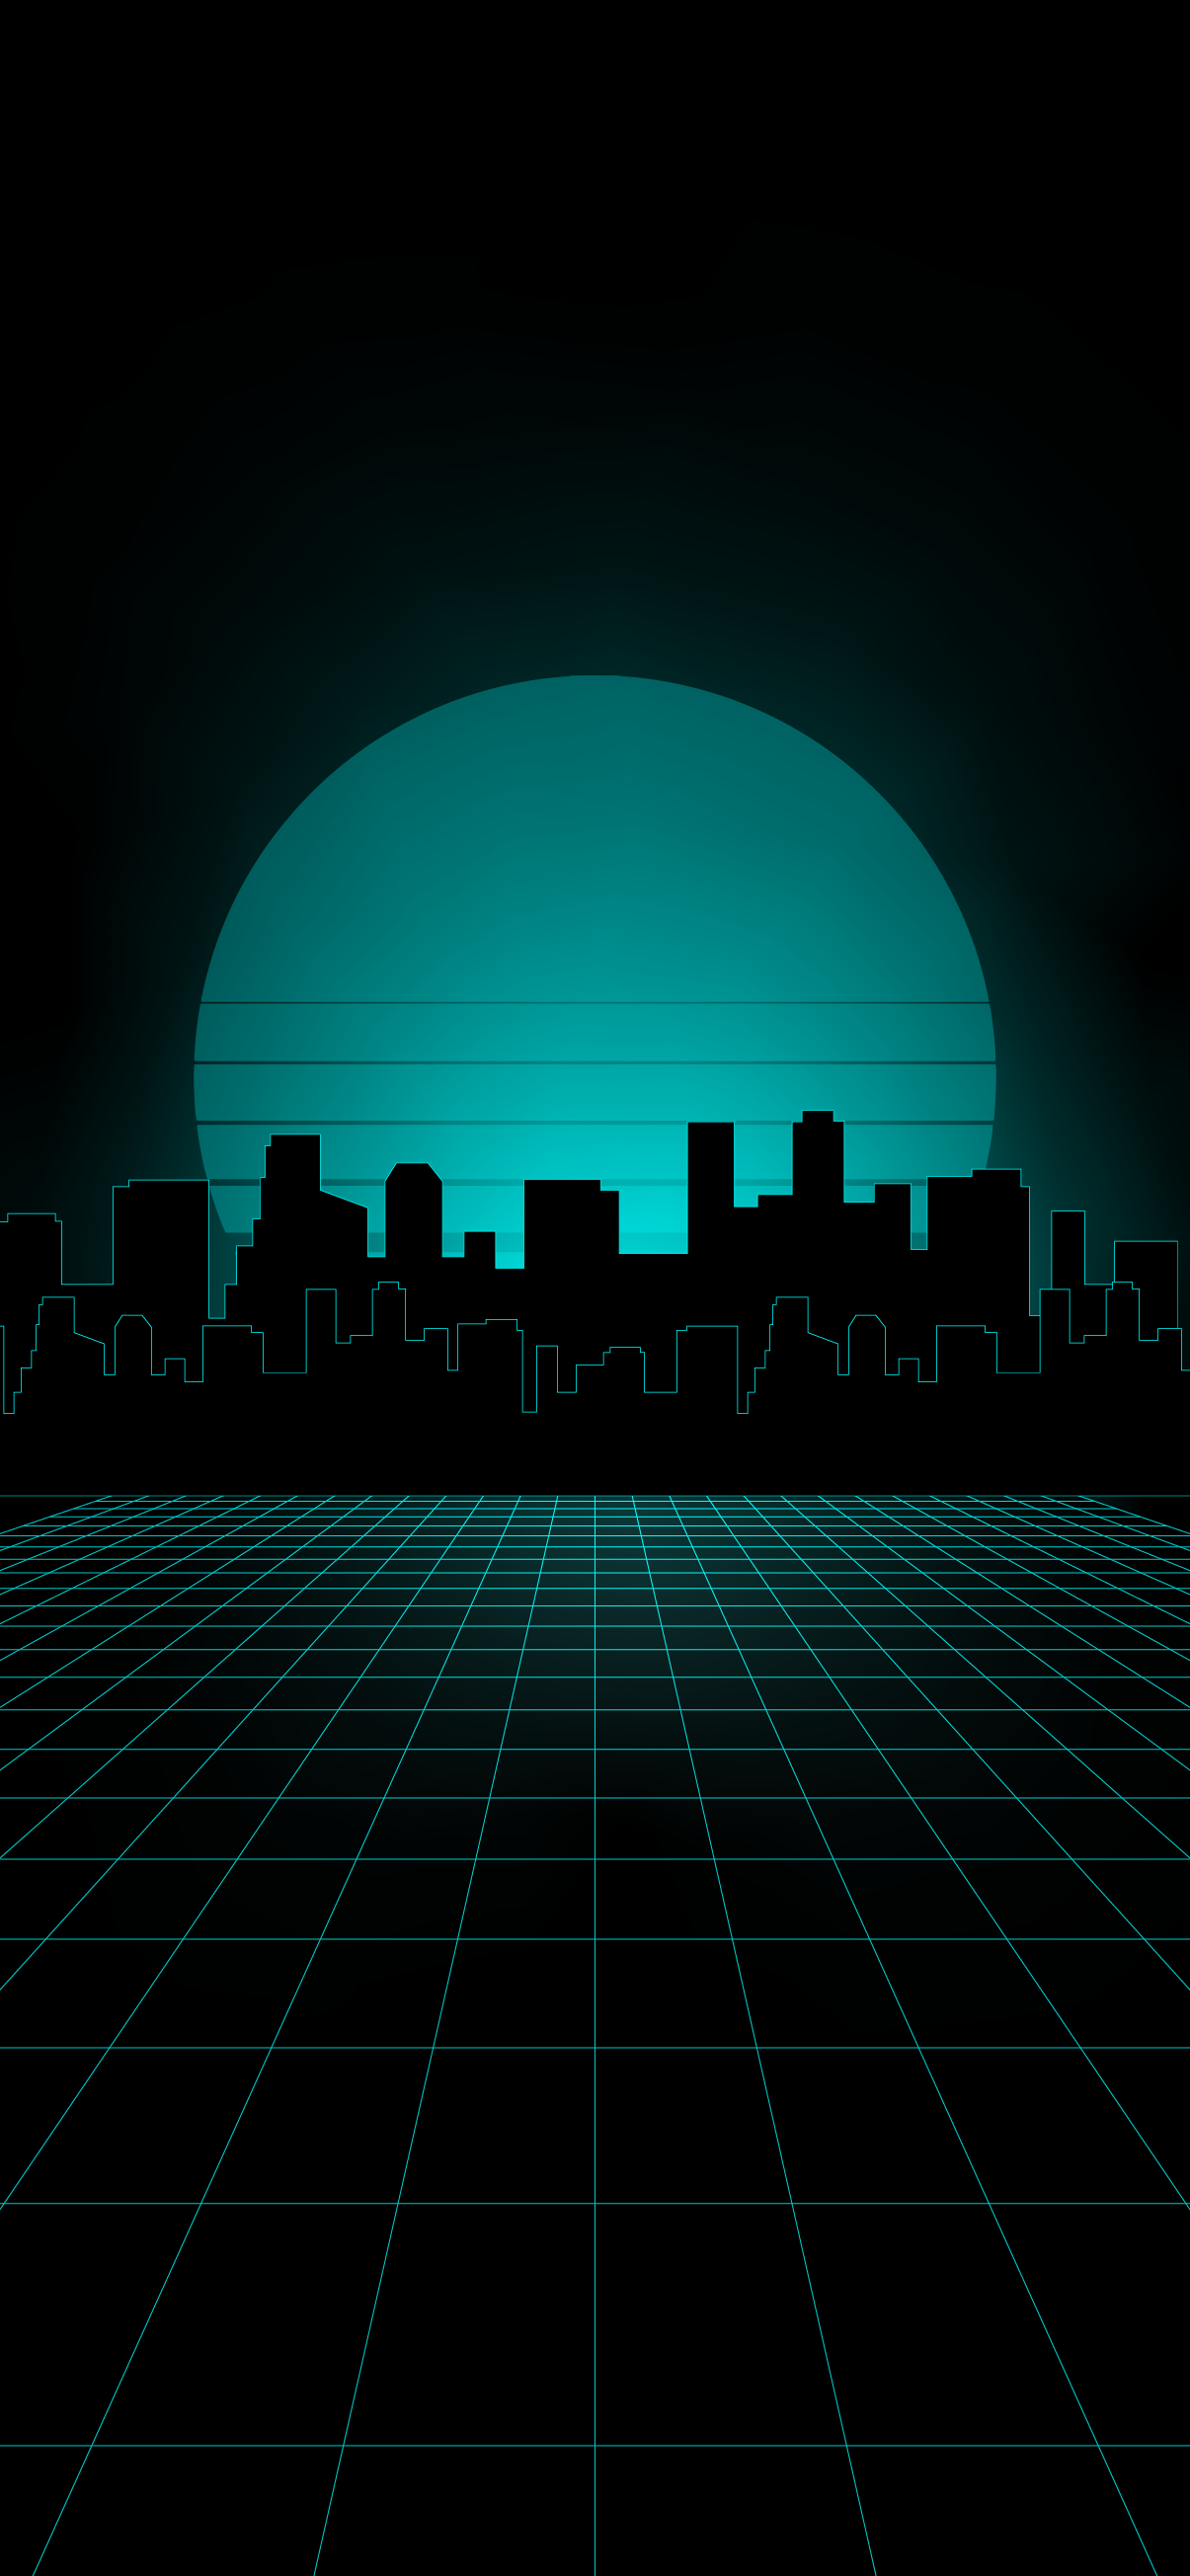 SYNTHWAVE CITY PHONE WALLPAPER 4K